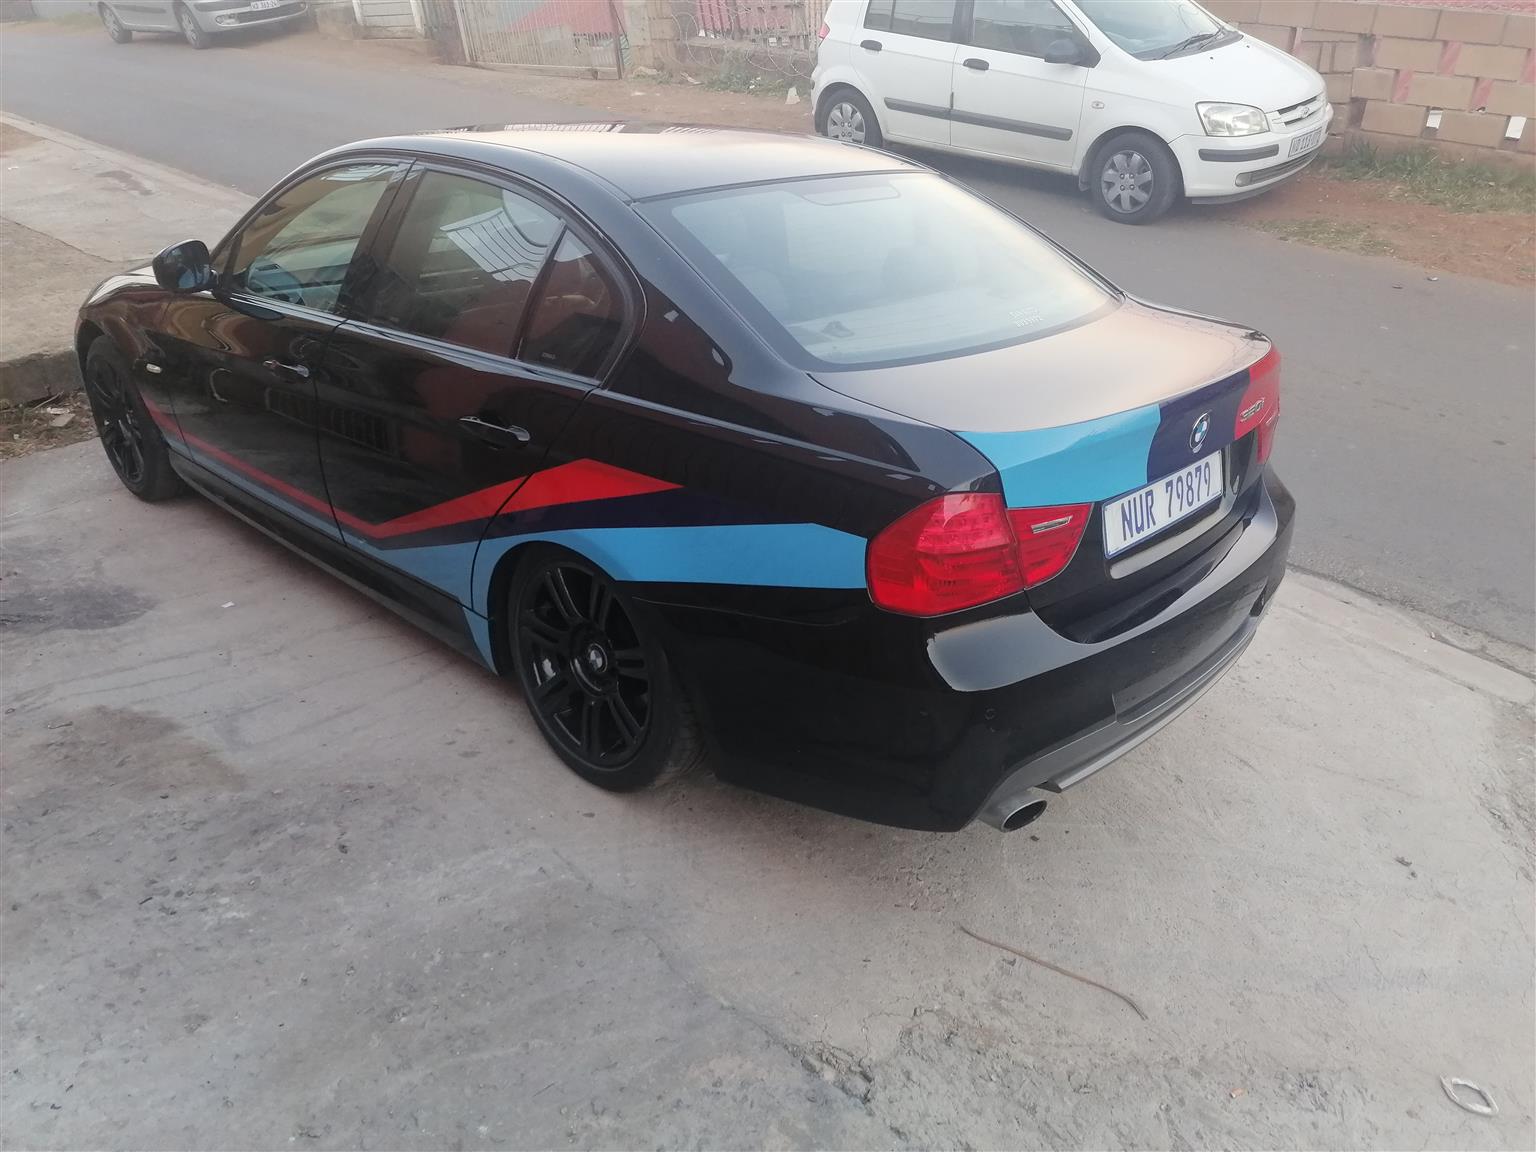 PRICE REDUCED BMW e90 320i. For sale..Bargain